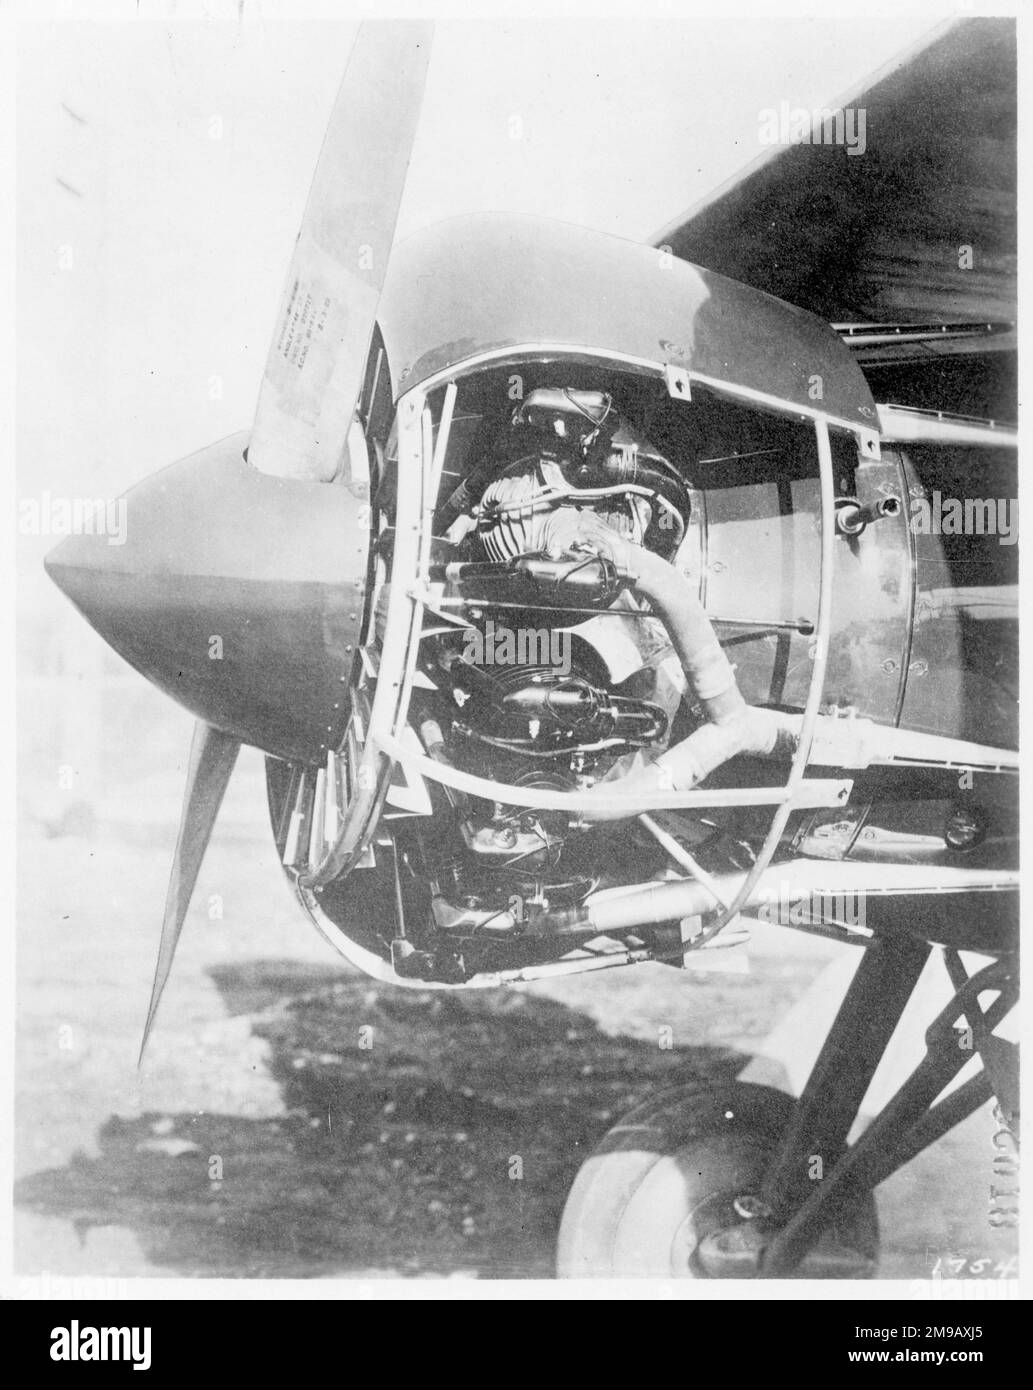 Curtiss XP-3A No.2 28-189 (msn 10993), fitted with a 410hp Pratt & Whitney R-1340-1 Wasp, in a close fitting NACA cowling. Not a prototype, but a production P-3A used for test work in development of the famous NACA cowling. It was placed second in the 1929 National Air Race Free-for-All at 186 mph (294'5 km/h), when the US Army raced against civilians for the last time. Later converted to XP-21 No.2 and then to a P-IF. Stock Photo